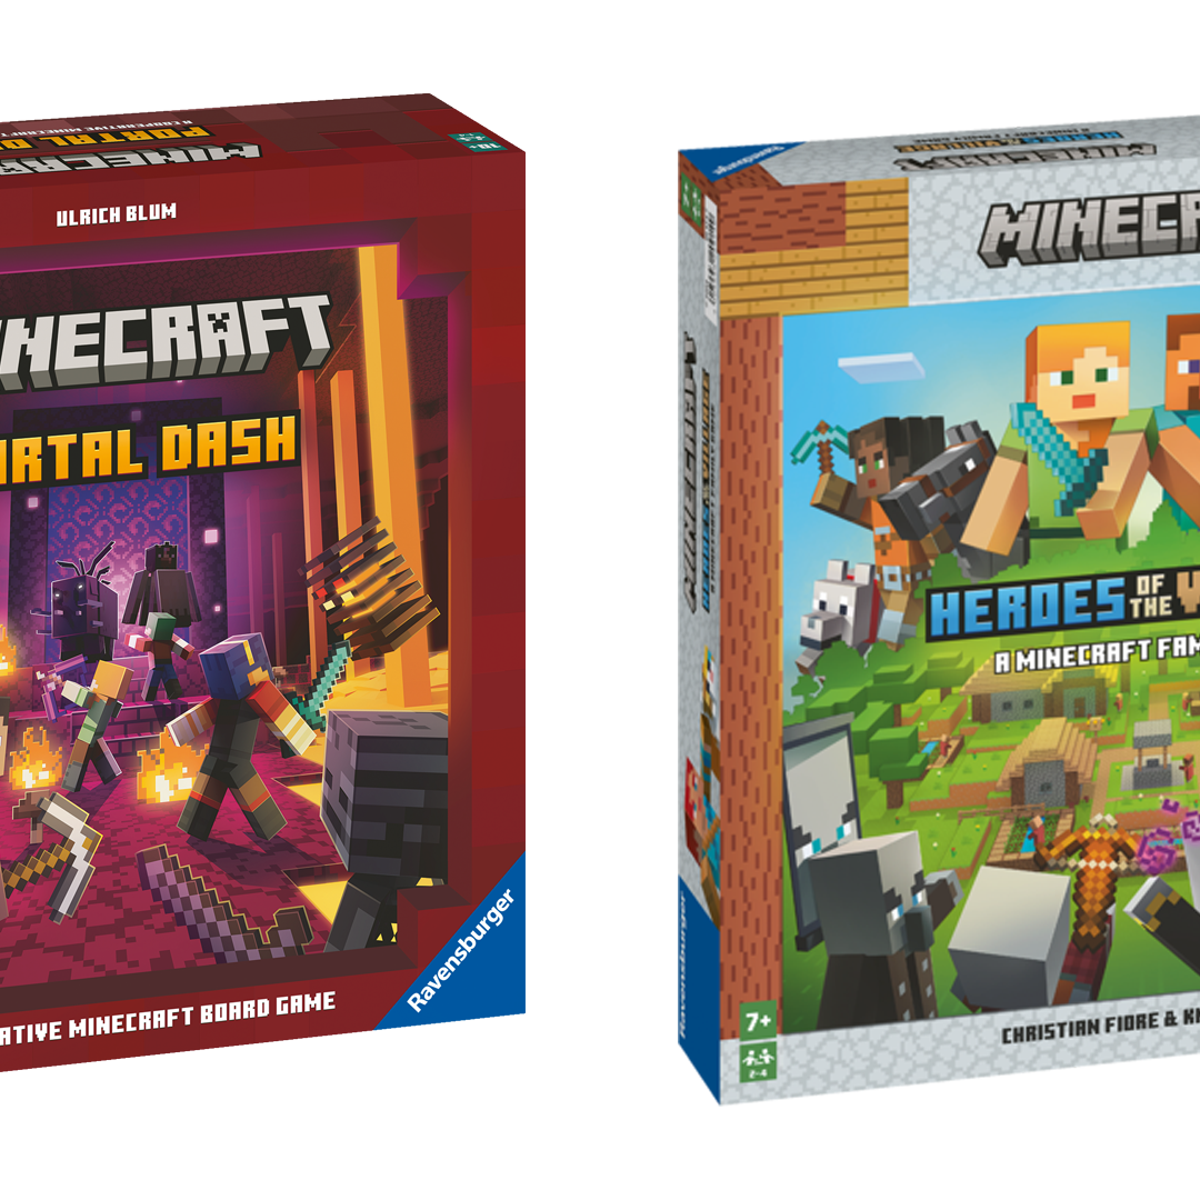 Two more Minecraft board games are coming from the Disney Villainous studio